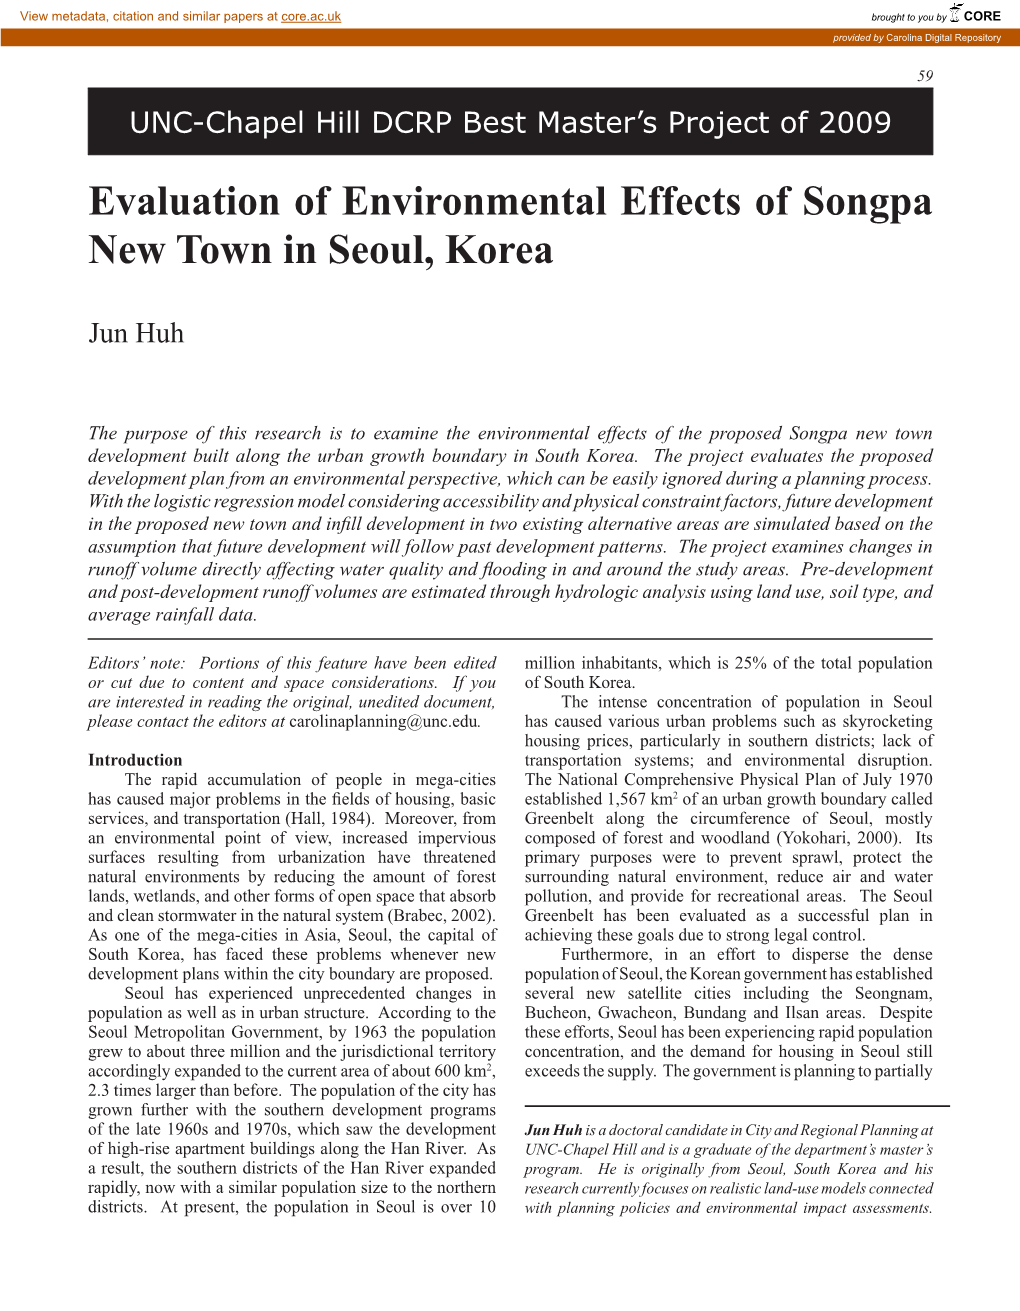 Evaluation of Environmental Effects of Songpa New Town in Seoul, Korea